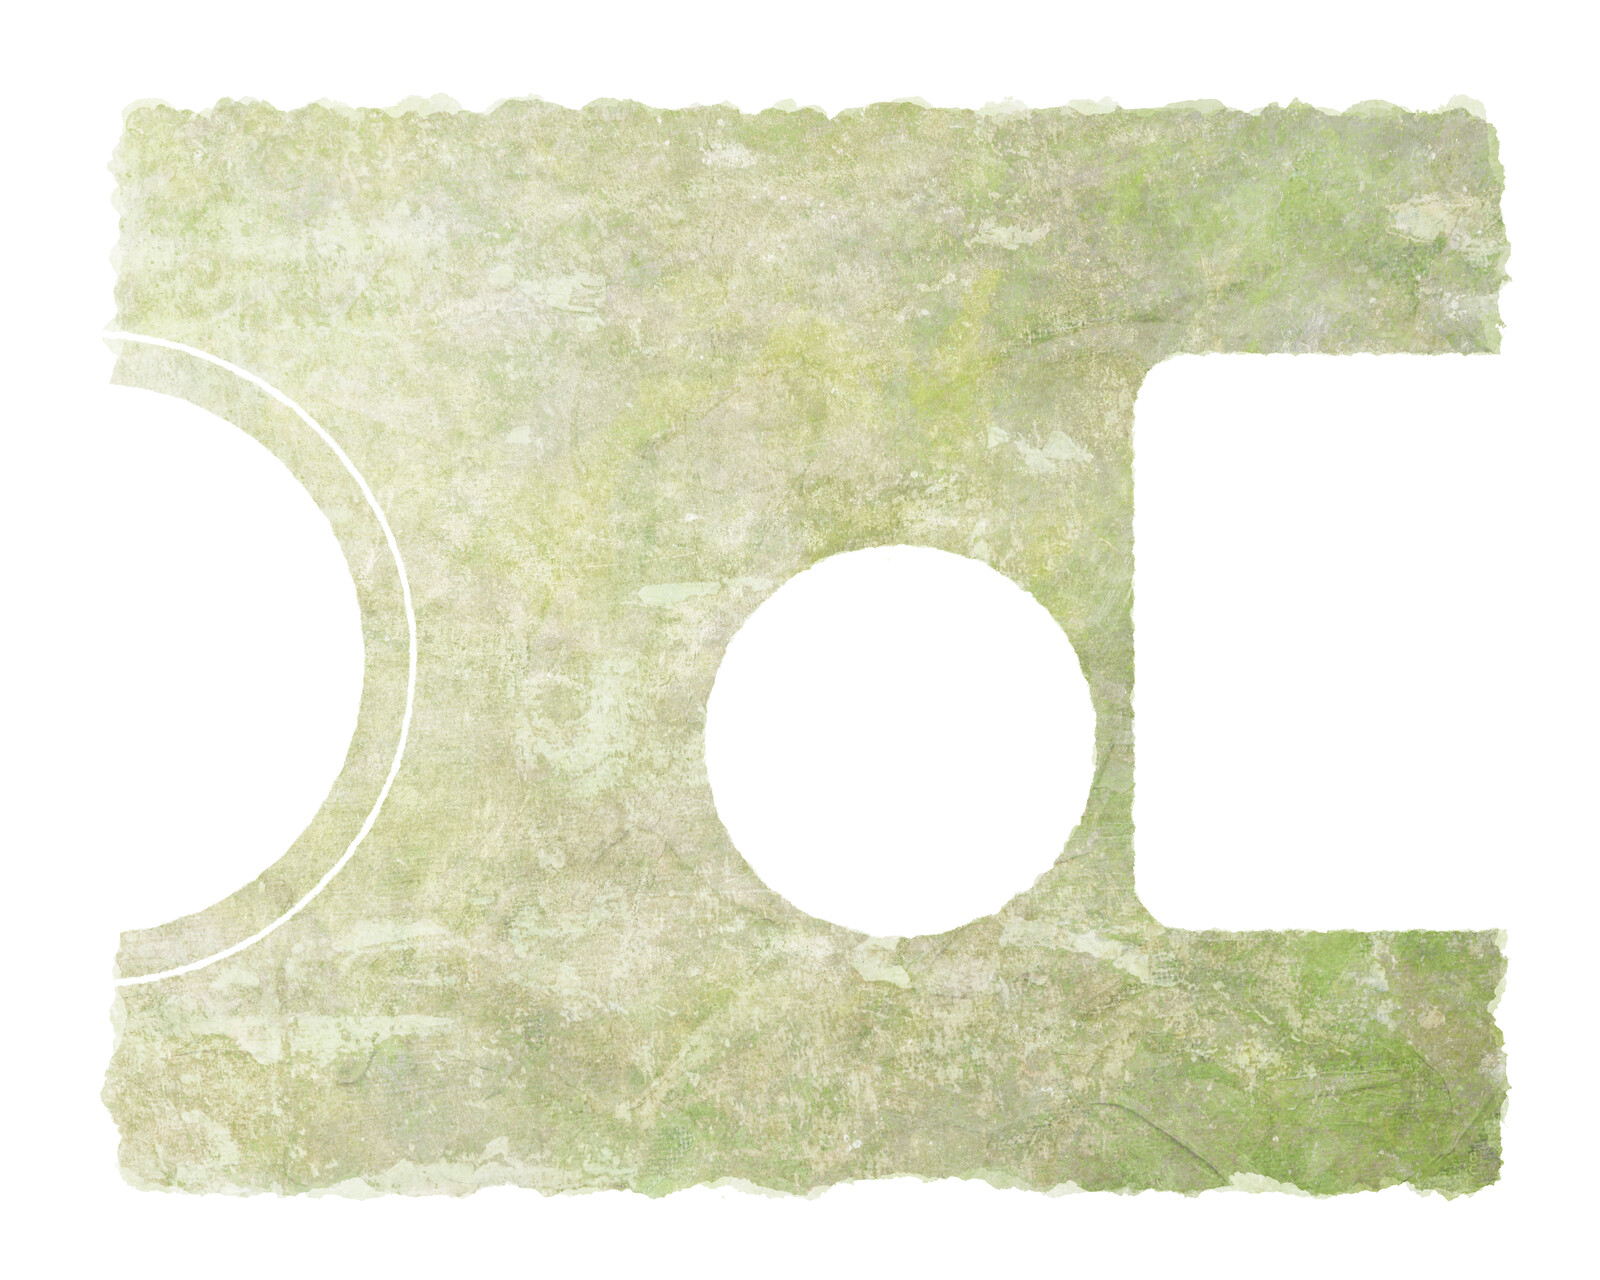 A large white circle with a thin white ring at far left, a smaller white circle in the center, and a white square at far right.